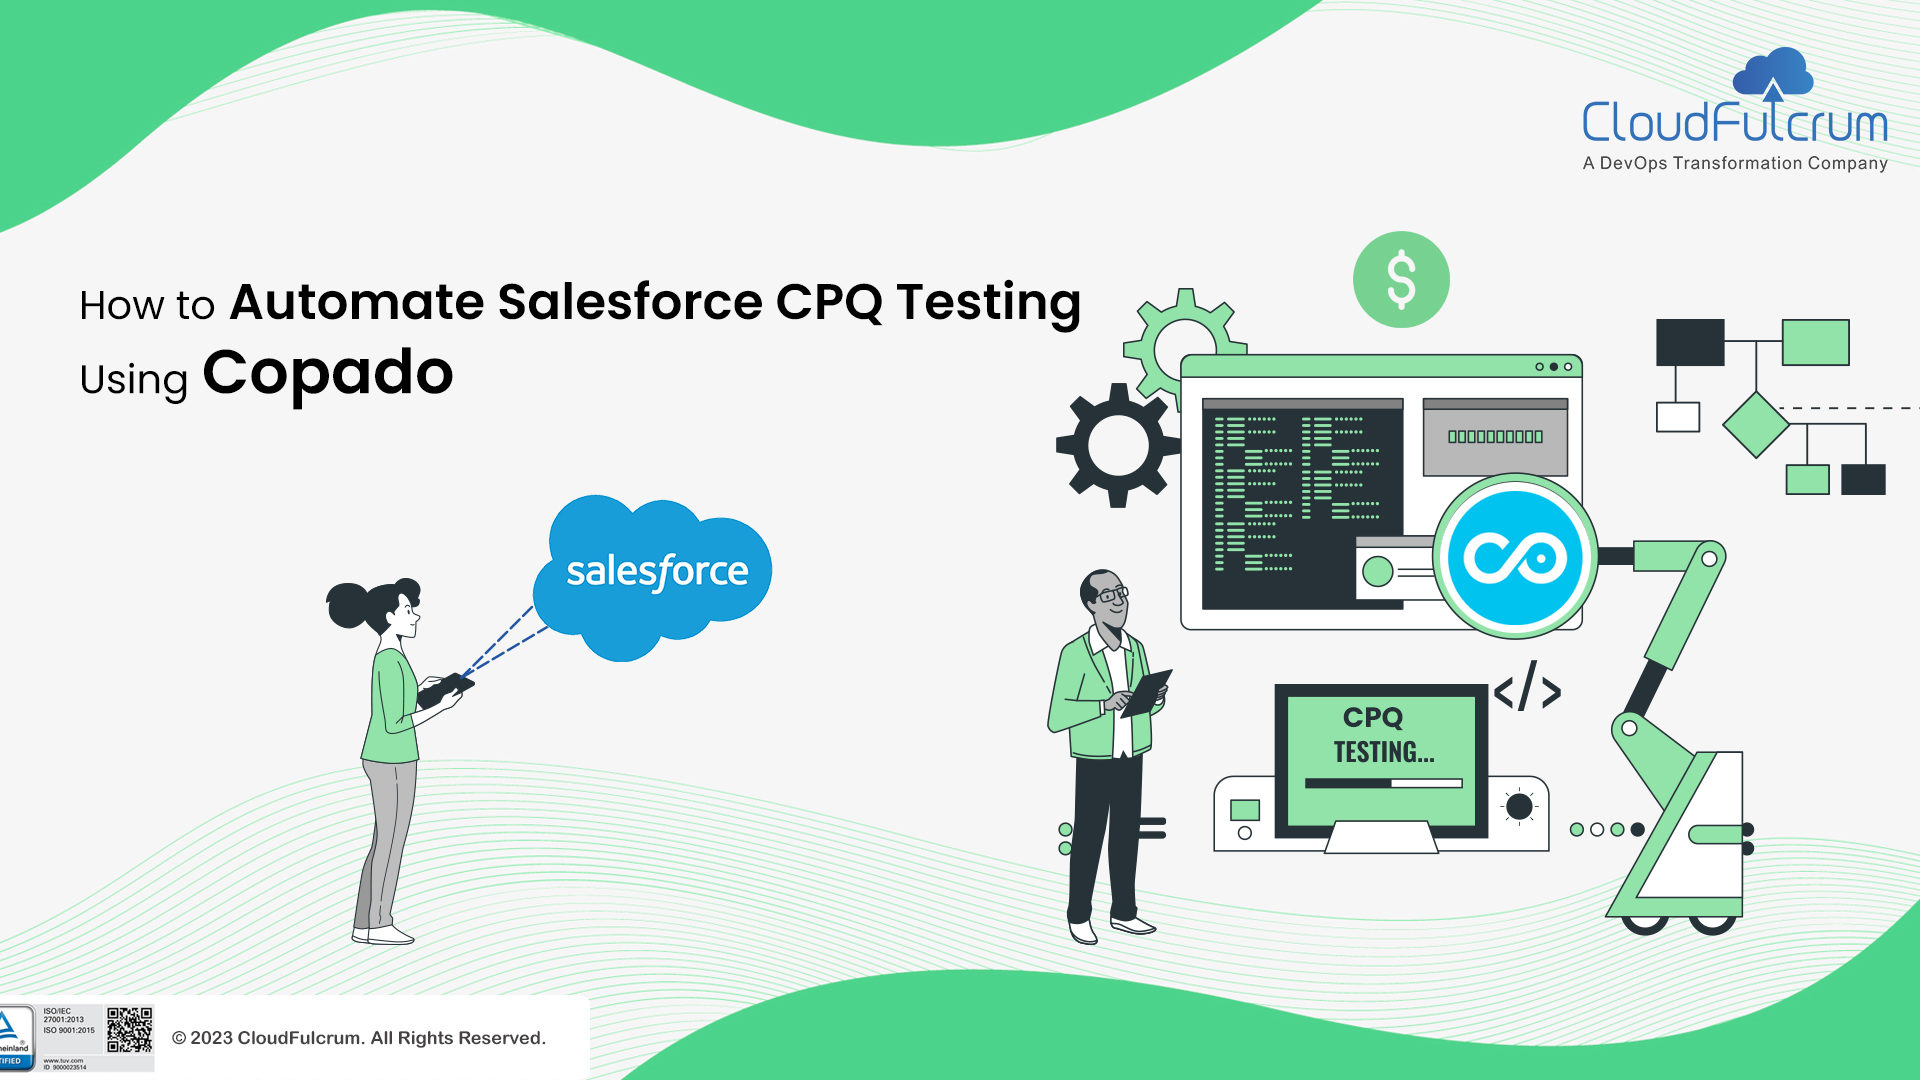 How to Automate Salesforce CPQ Testing Using Copado